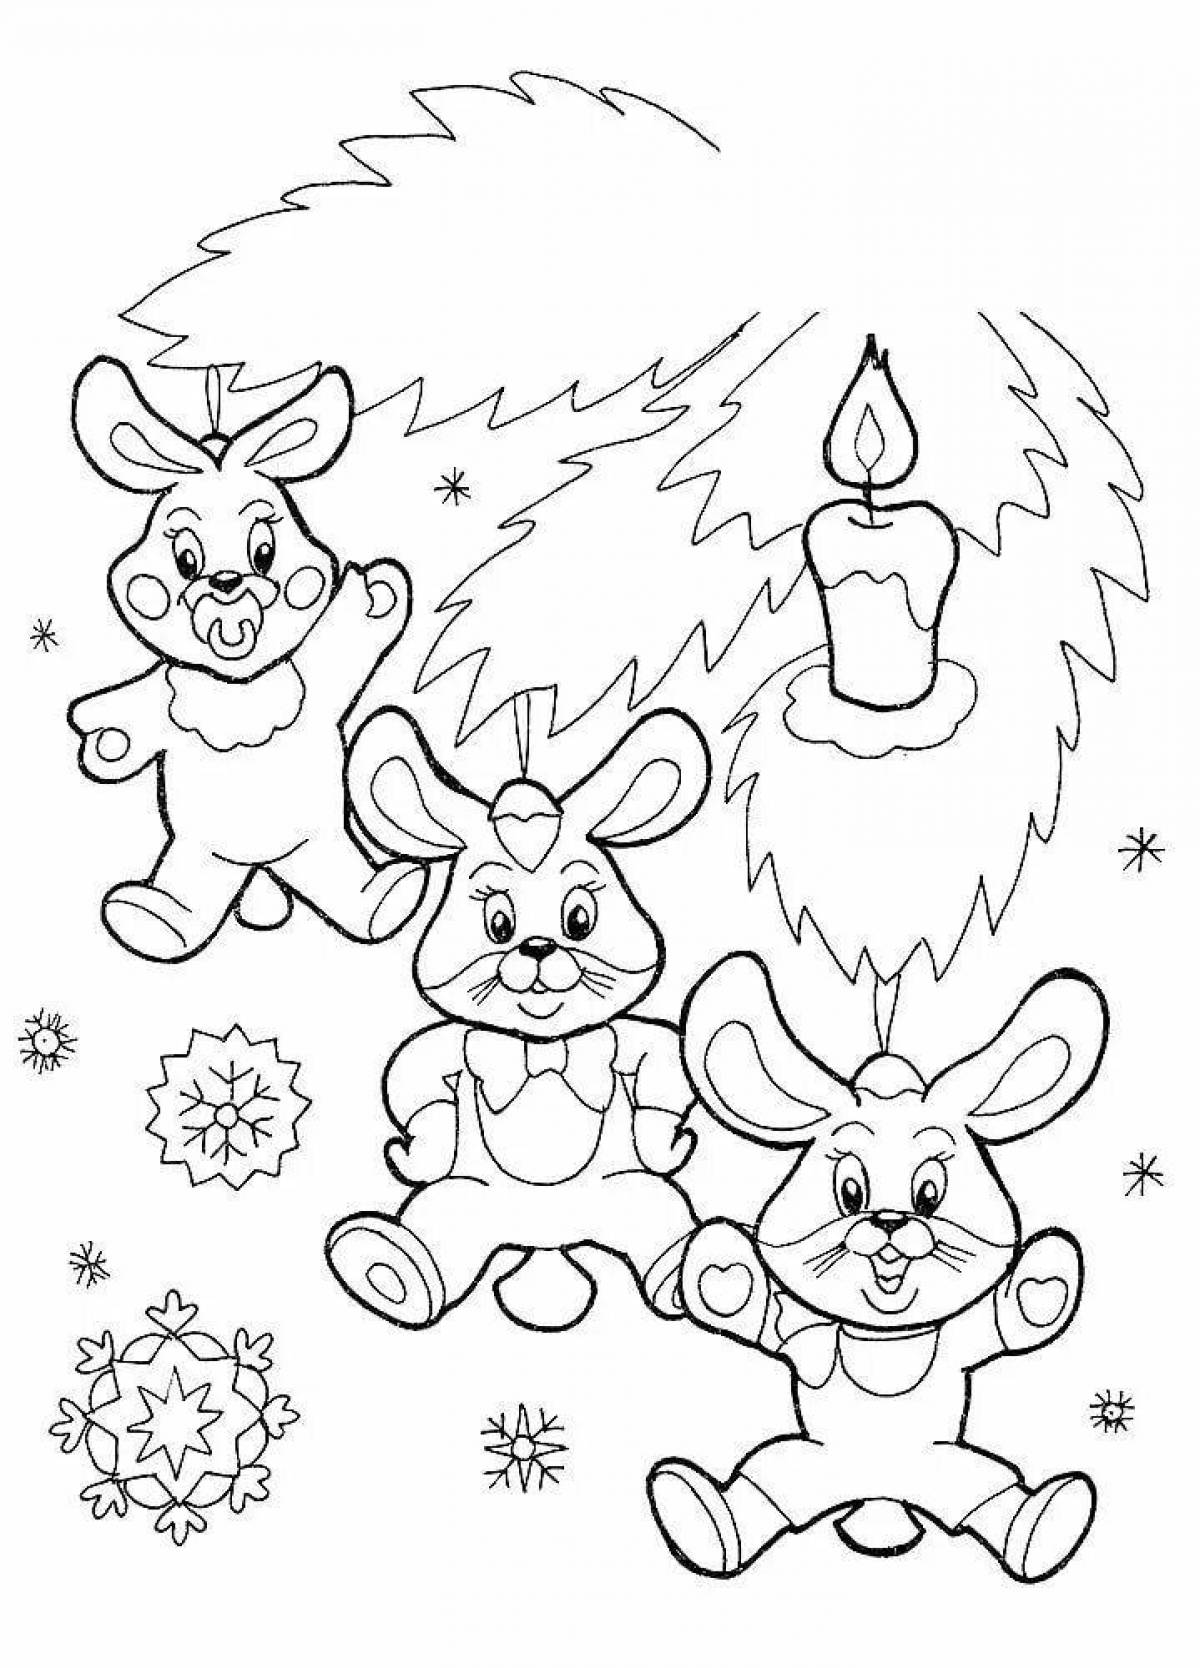 Glorious new year 2023 coloring page